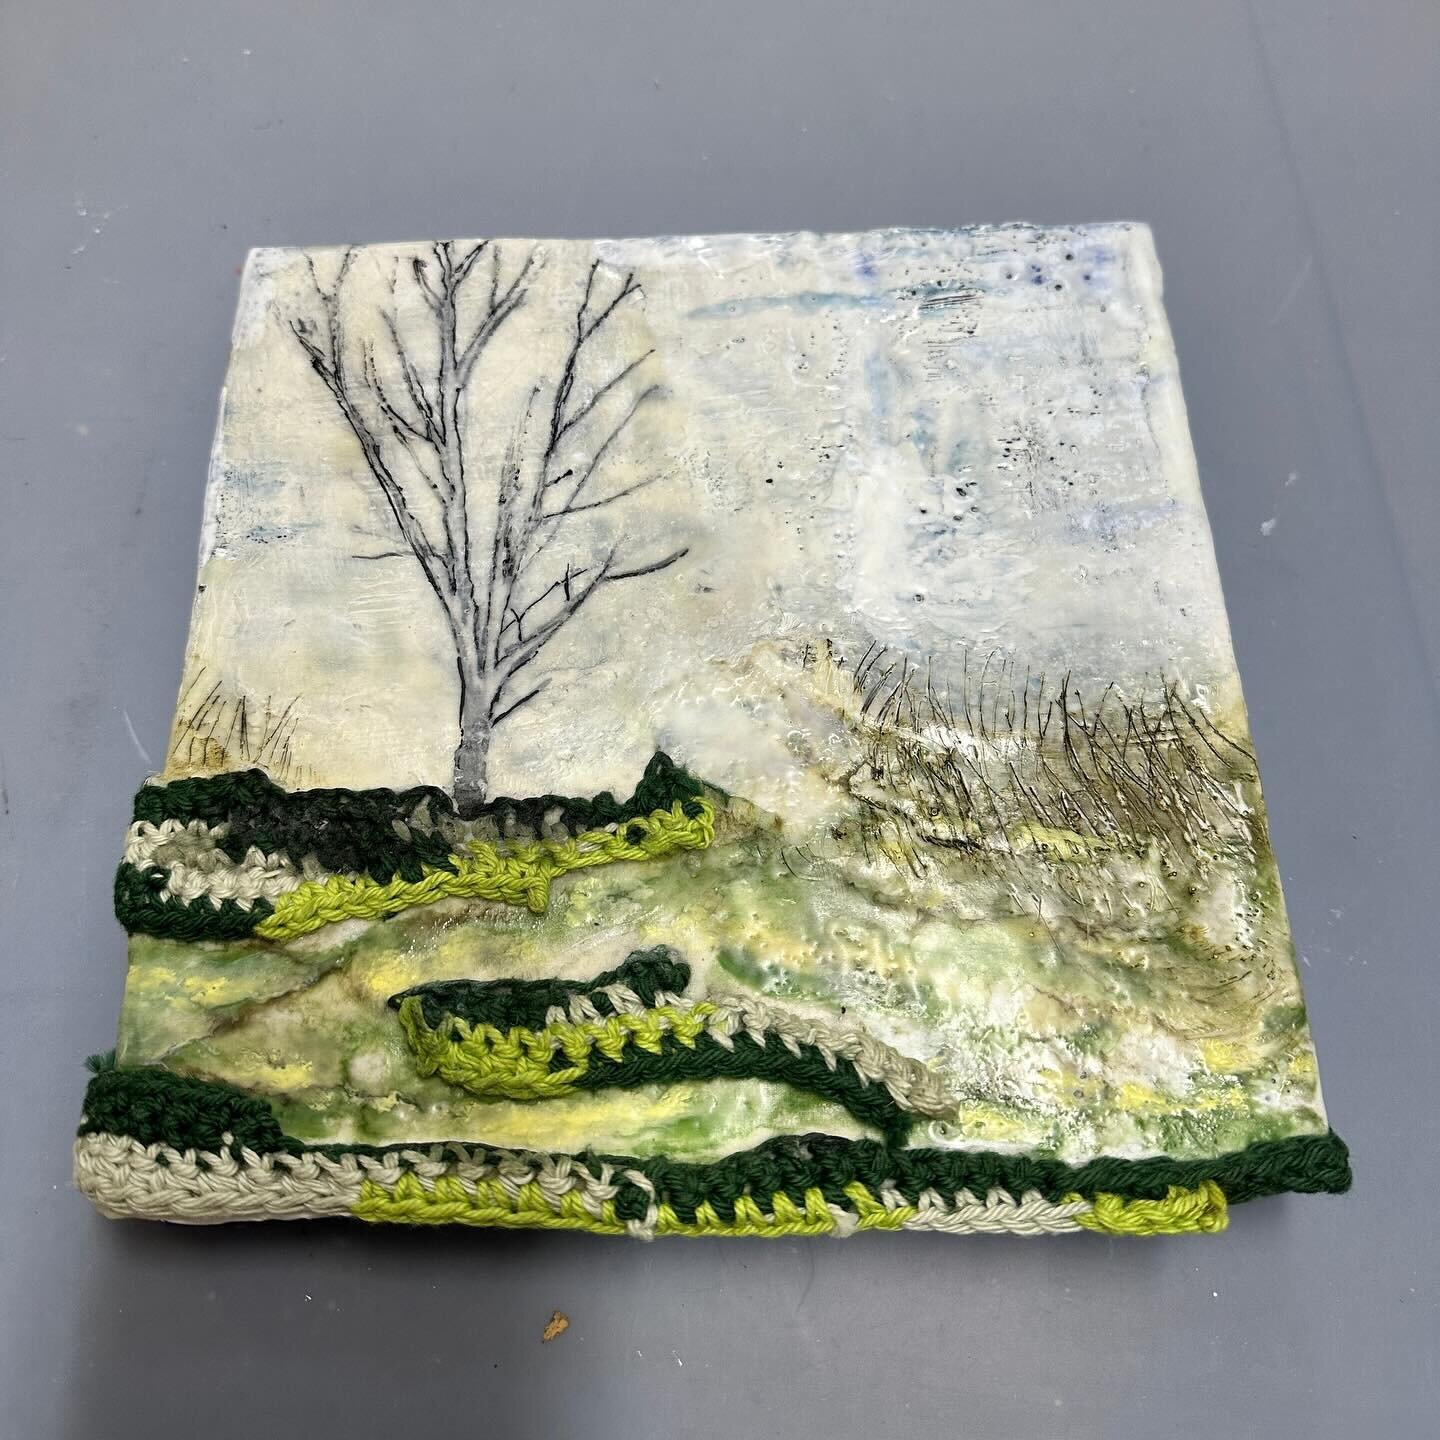 Decided to re-do this piece of art. I was not happy with how the collage tree element was a bit yellow. Swipe to see some in-process videos and the finished piece. ⁠
⁠
#redoingart #paintingover #paintingoverpaintings #reworking #afreshlook #studio_st